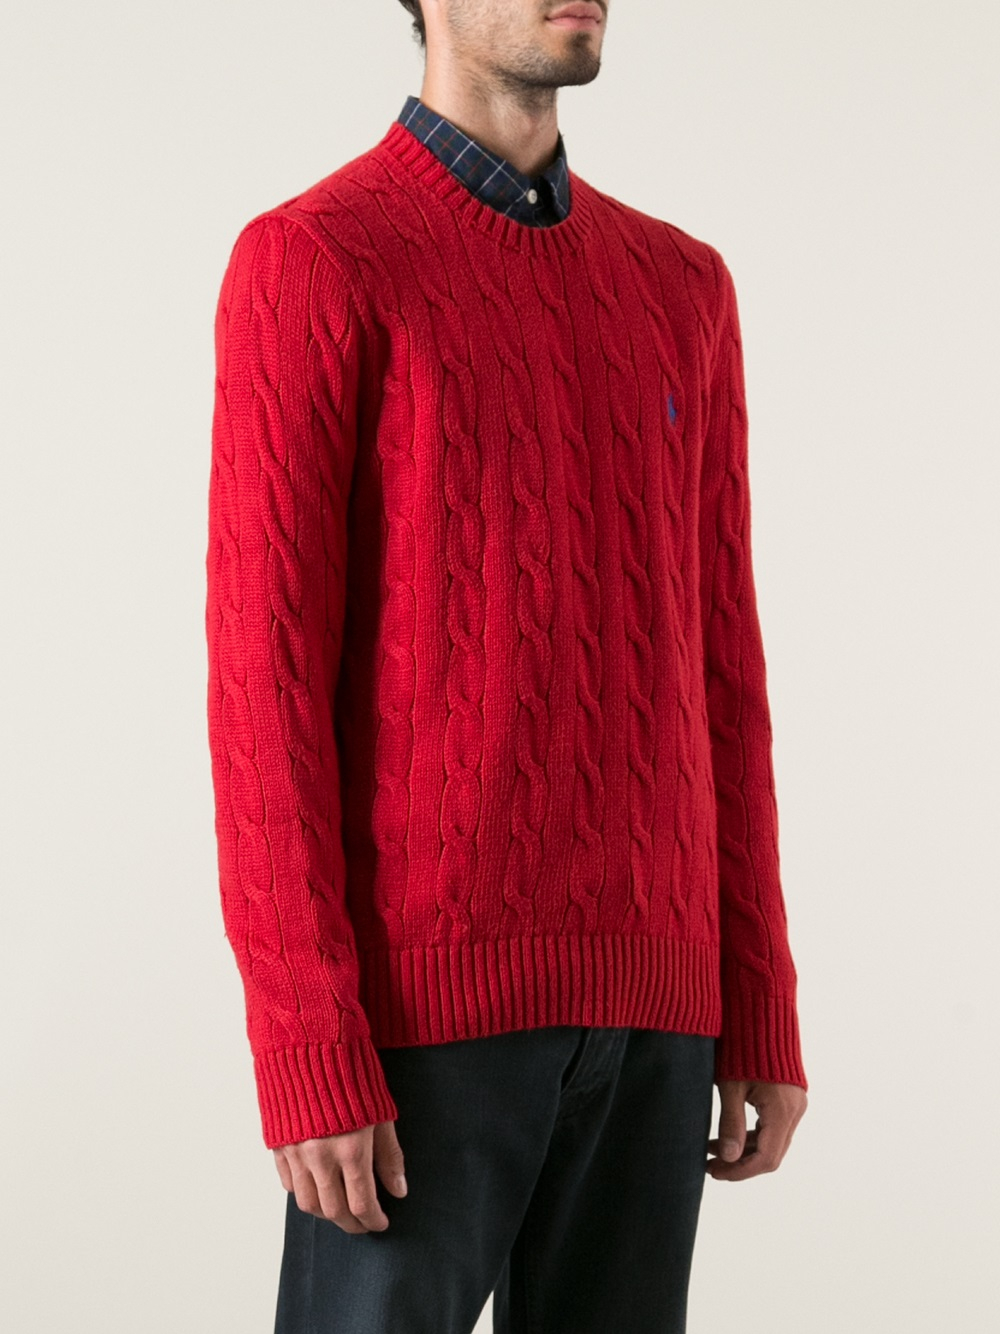 Lyst - Polo Ralph Lauren Cable Knit Sweater in Red for Men